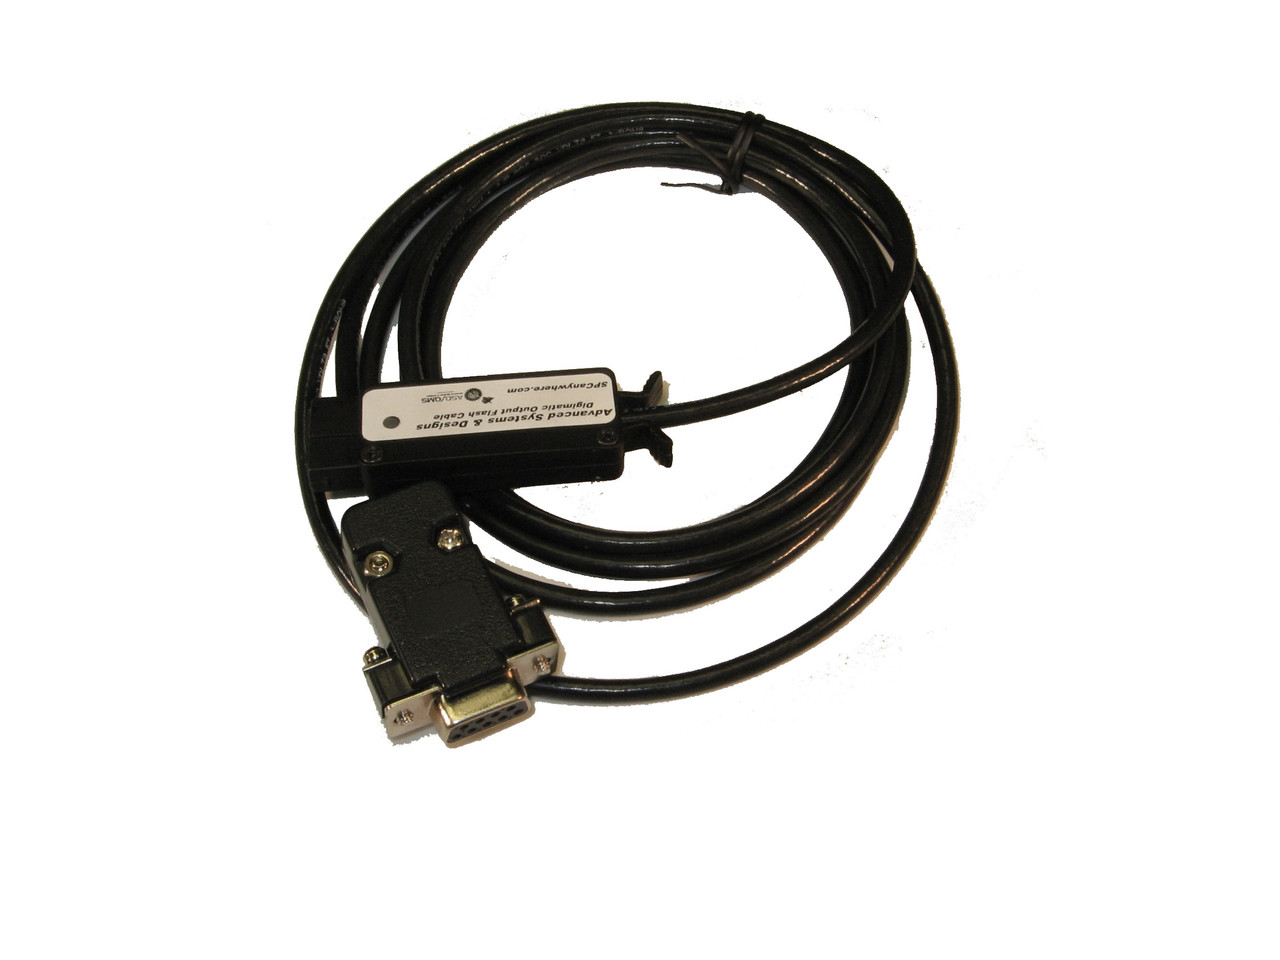 Gage Interface Cable for Mark-10 BG Series Digital Force Gauge